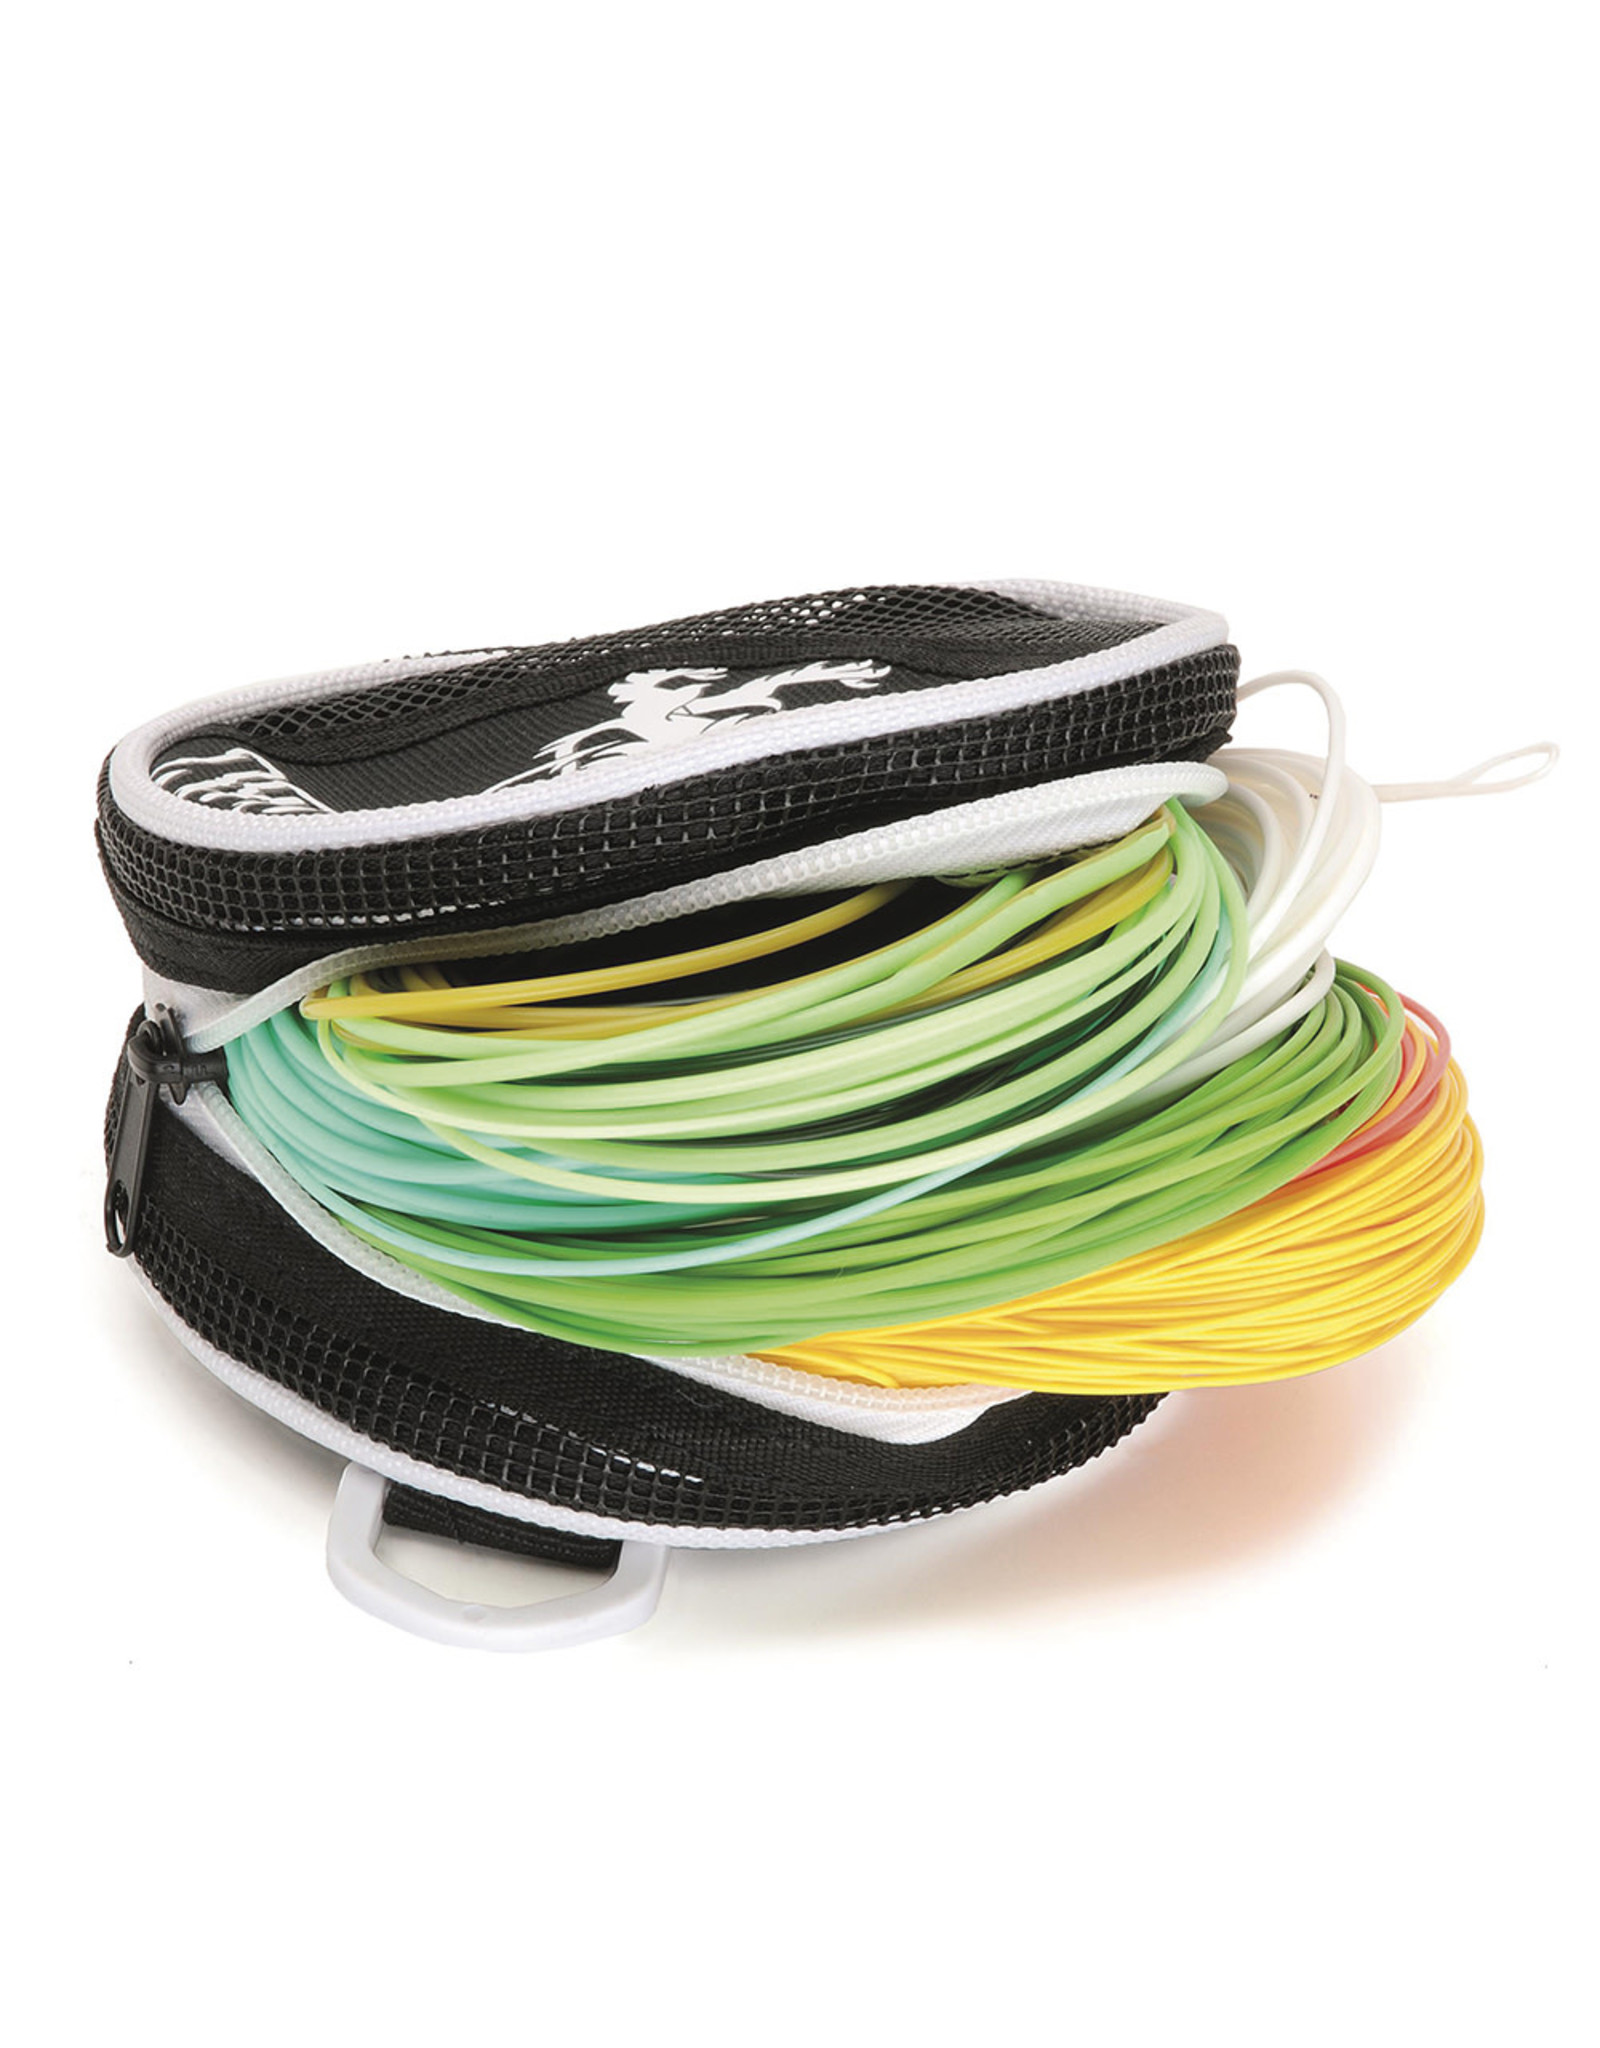 VISION FLY FISHING Vision Ace Head Wallet